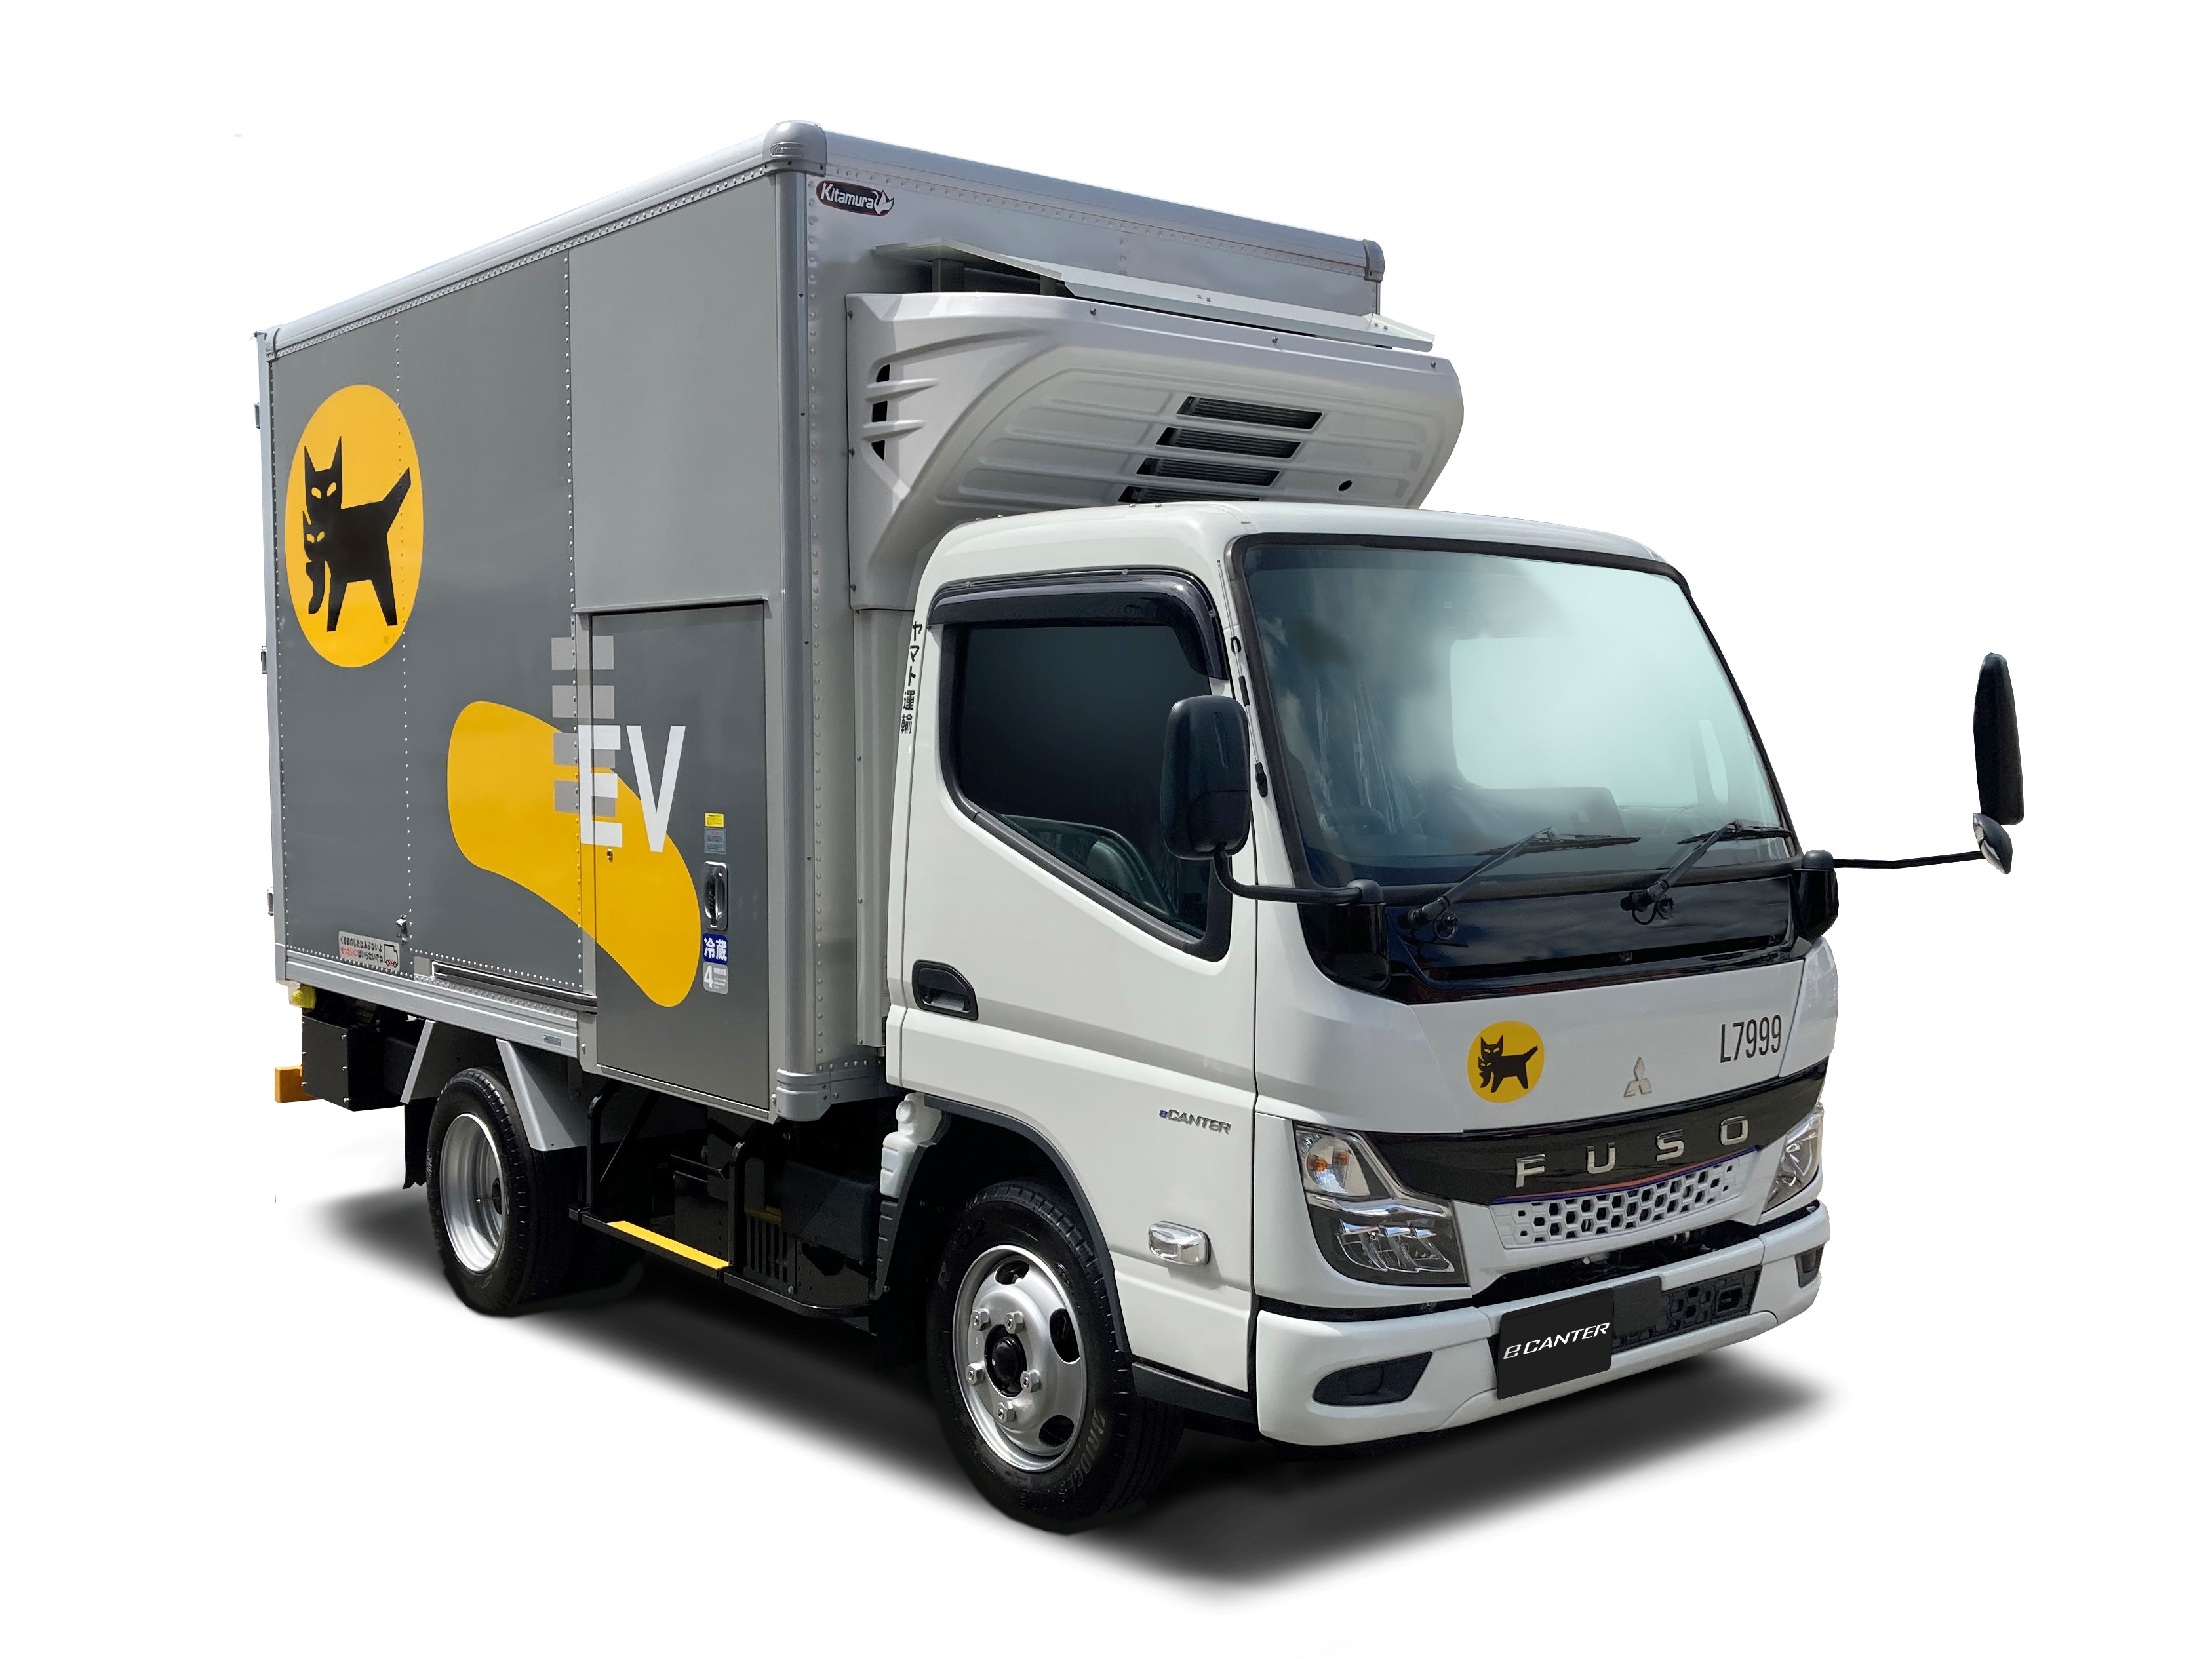 First Delivery of newest model ‘eCanter’ electric trucks: Around 900 units to be introduced by Yamato Transport